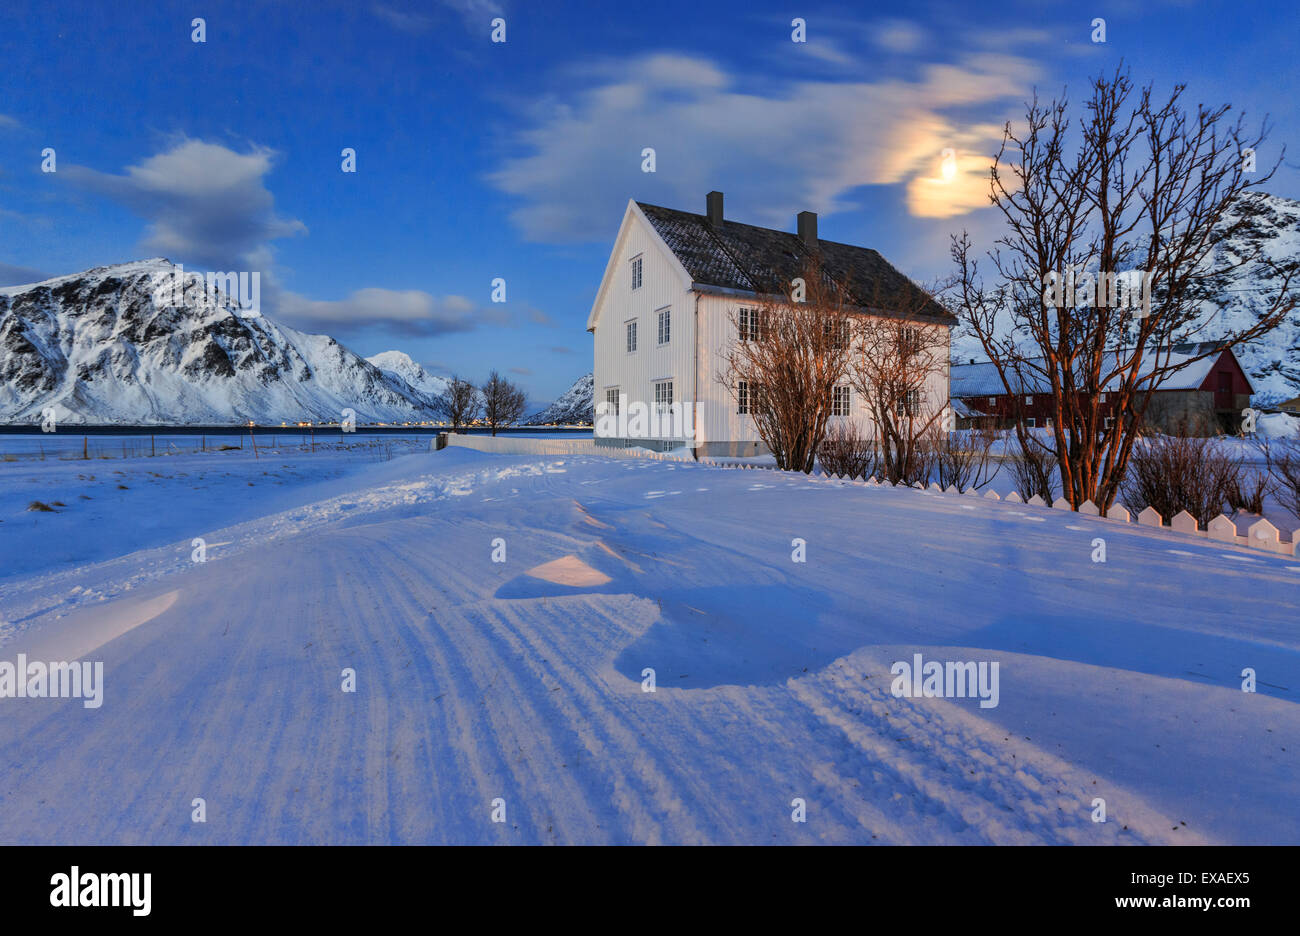 Typical house surrounded by snow on a cold winter day at dusk, Flakstad, Lofoten Islands, Norway, Scandinavia, Europe Stock Photo